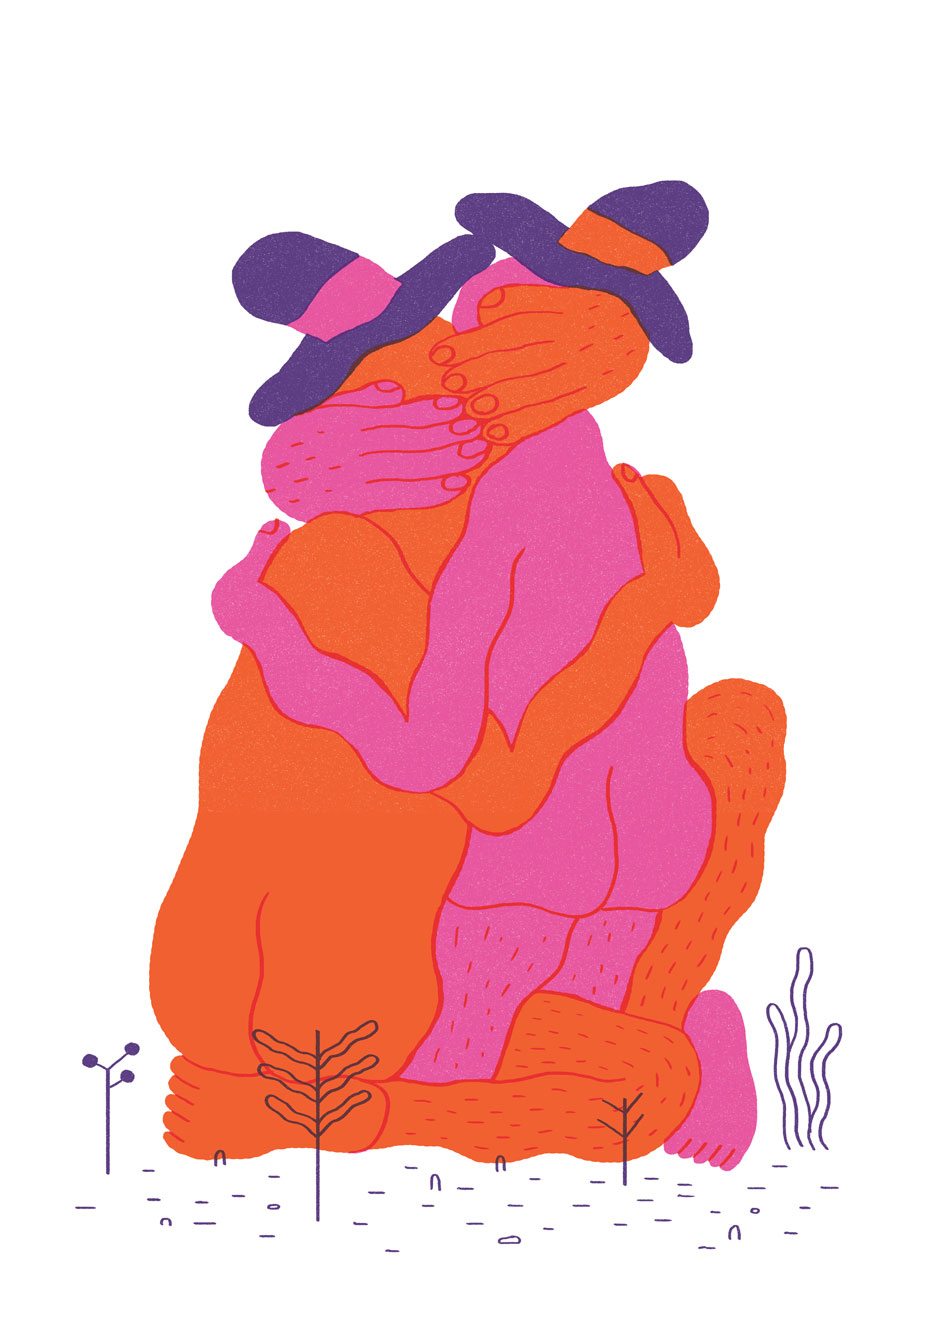 A drawing of two people in hats, kissing.